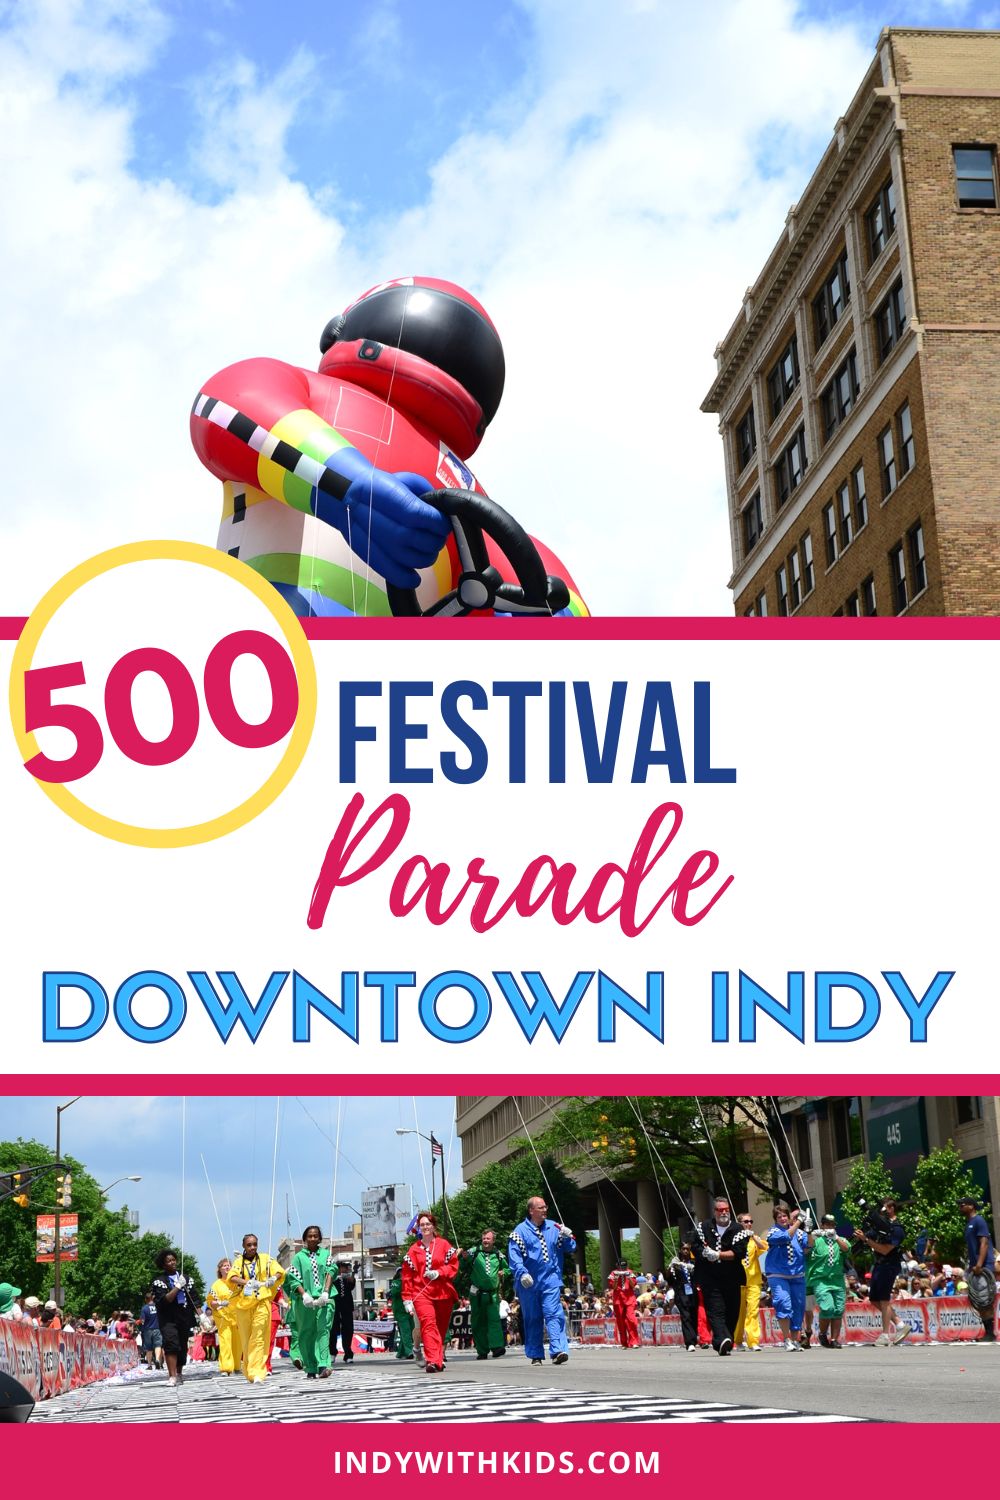 500 Festival Parade in Downtown Indy